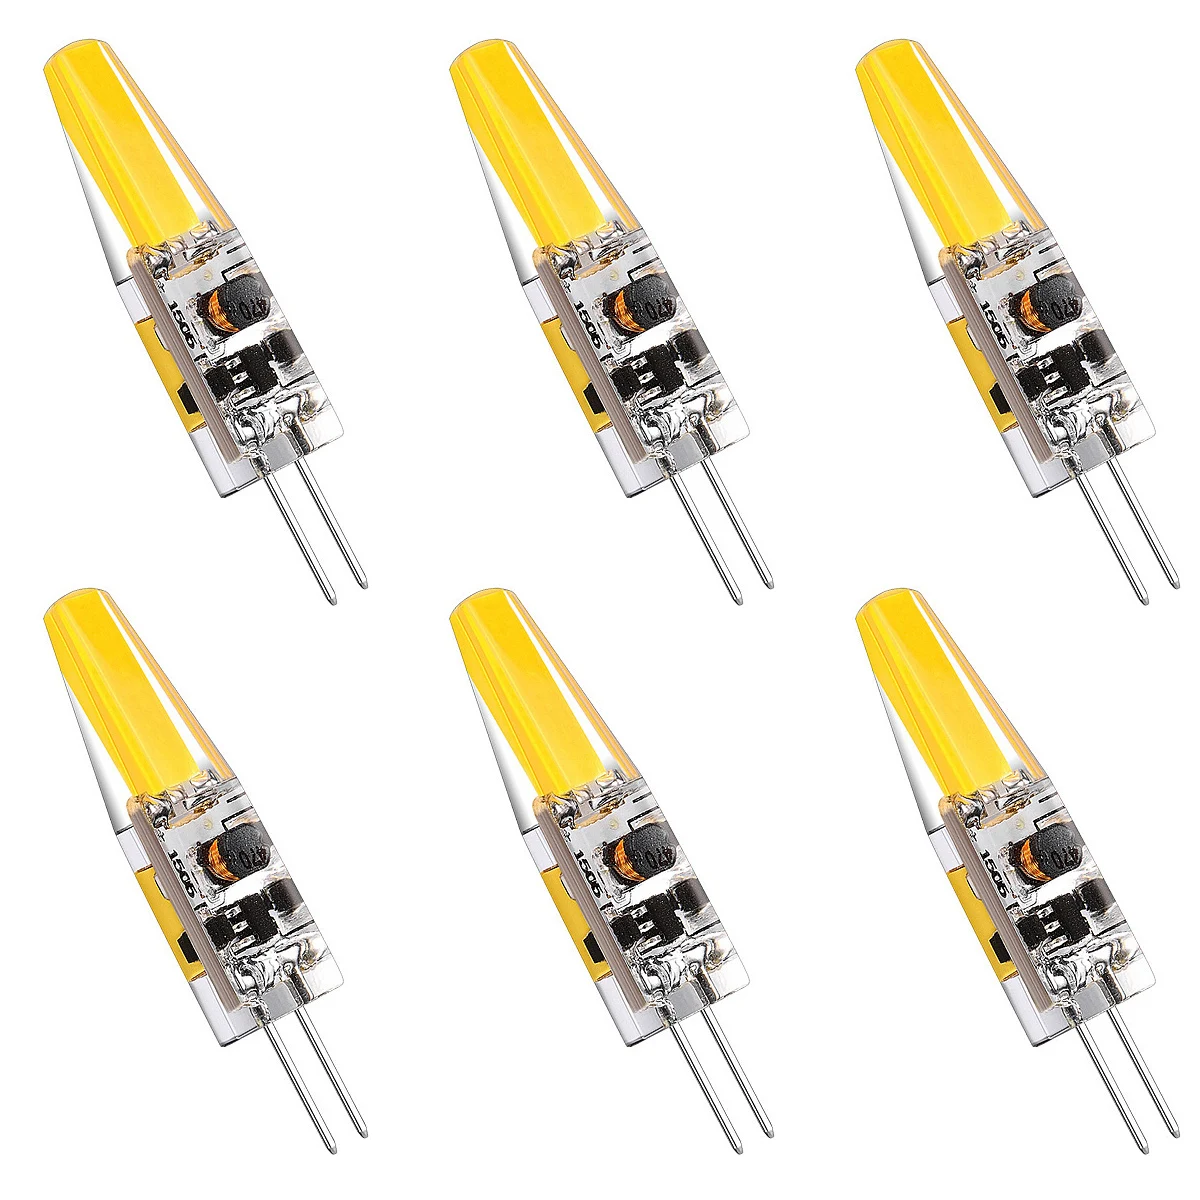 6 PCS Dimmable Mini G4 LED COB Lamp 6W Bulb AC DC 12V 220V Candle Lights Replace 30W 40W Halogen for Chandelier Spotlight Light